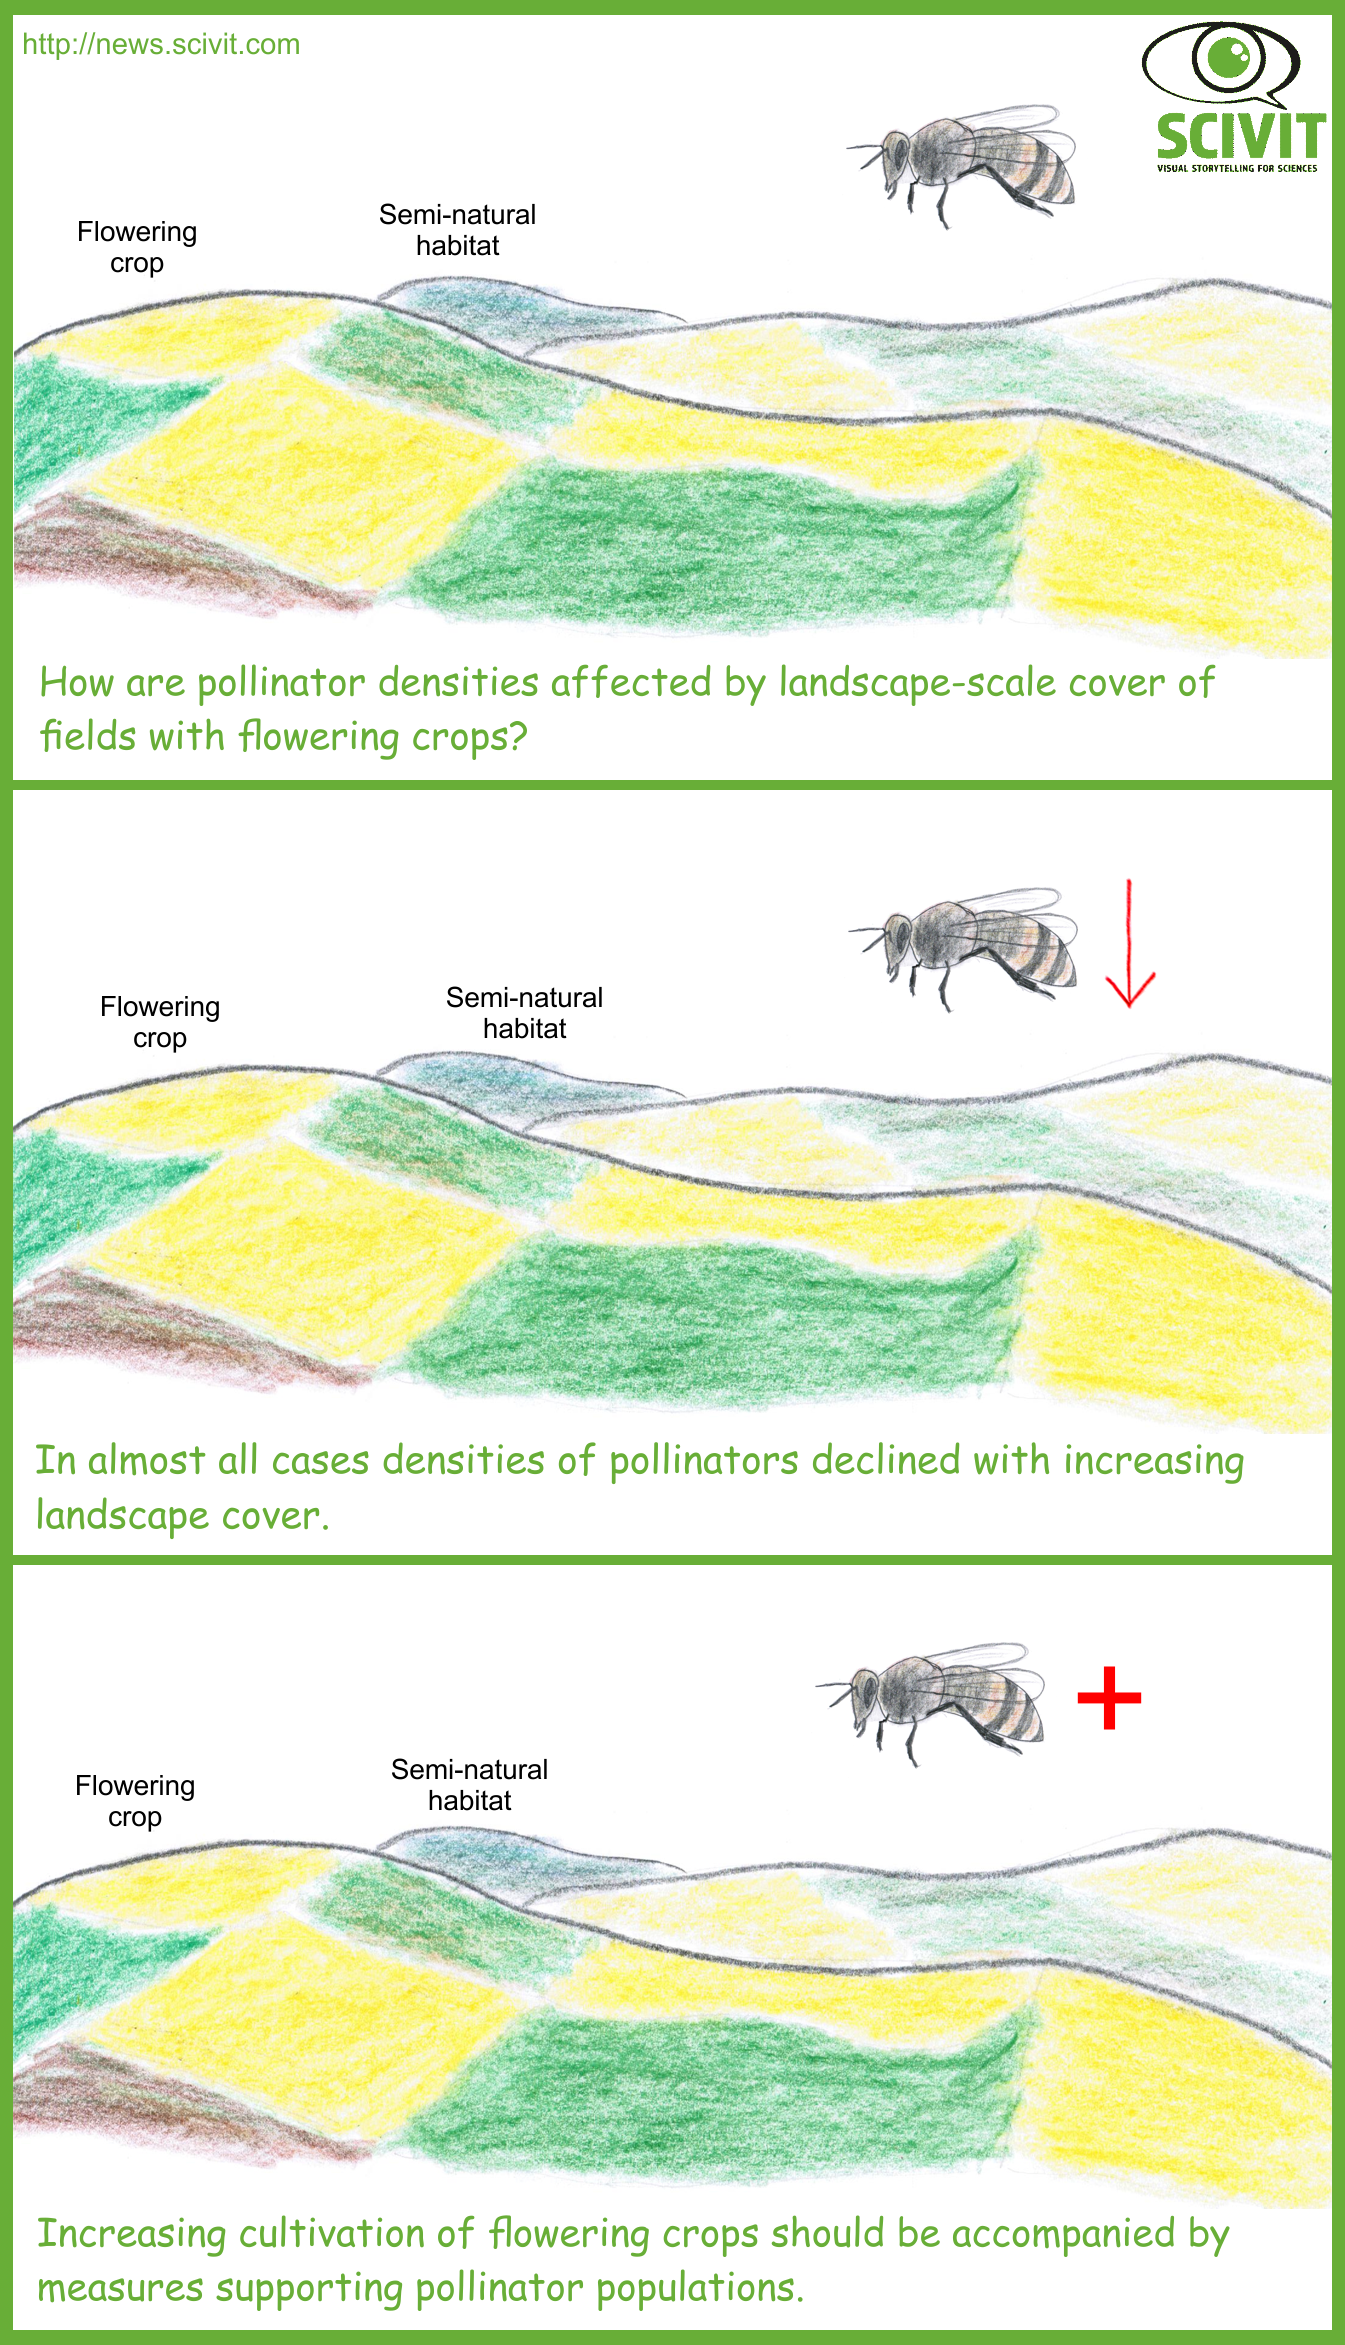 Fields with flowering crops are absorbing pollinators - Scivit News